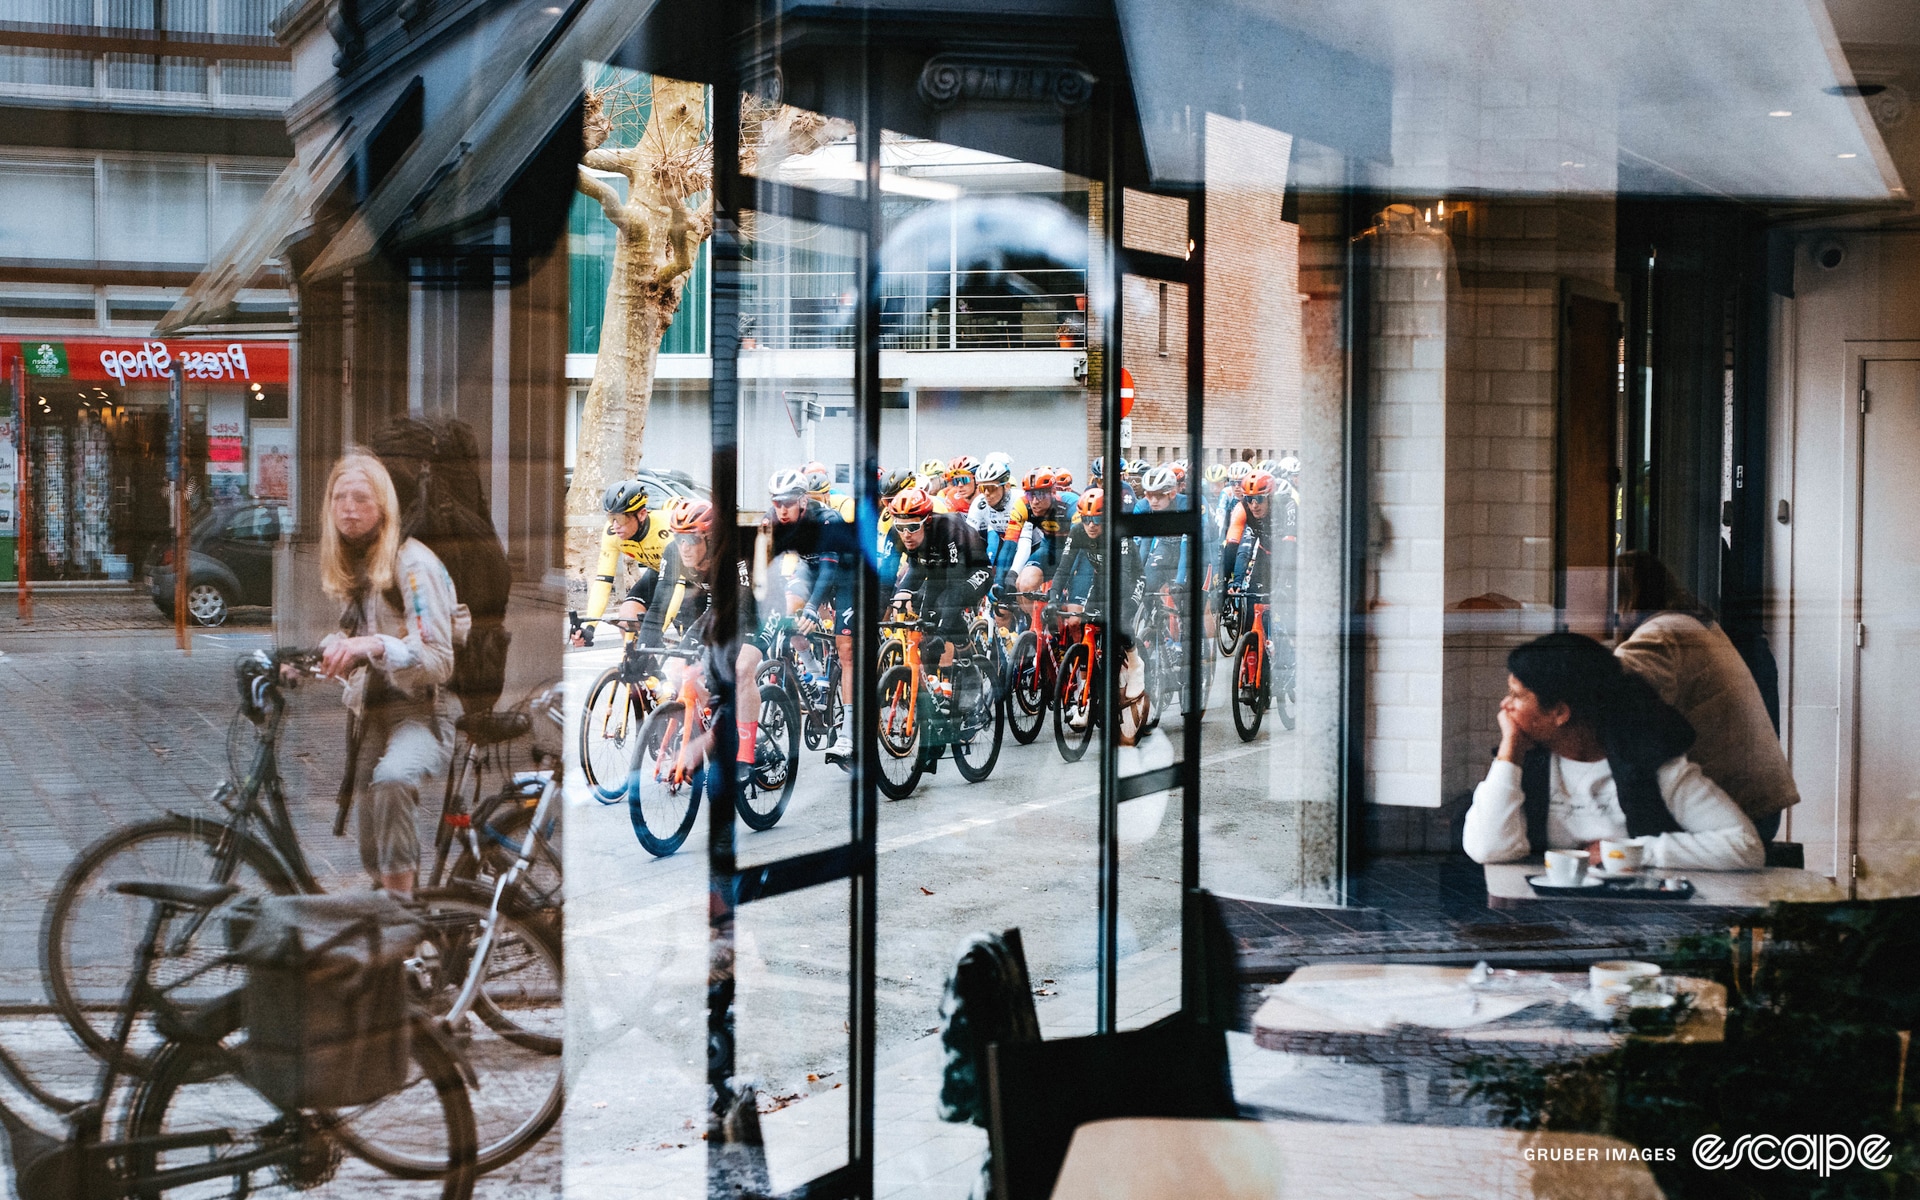 A peloton rides along, as seen from inside a cafe.